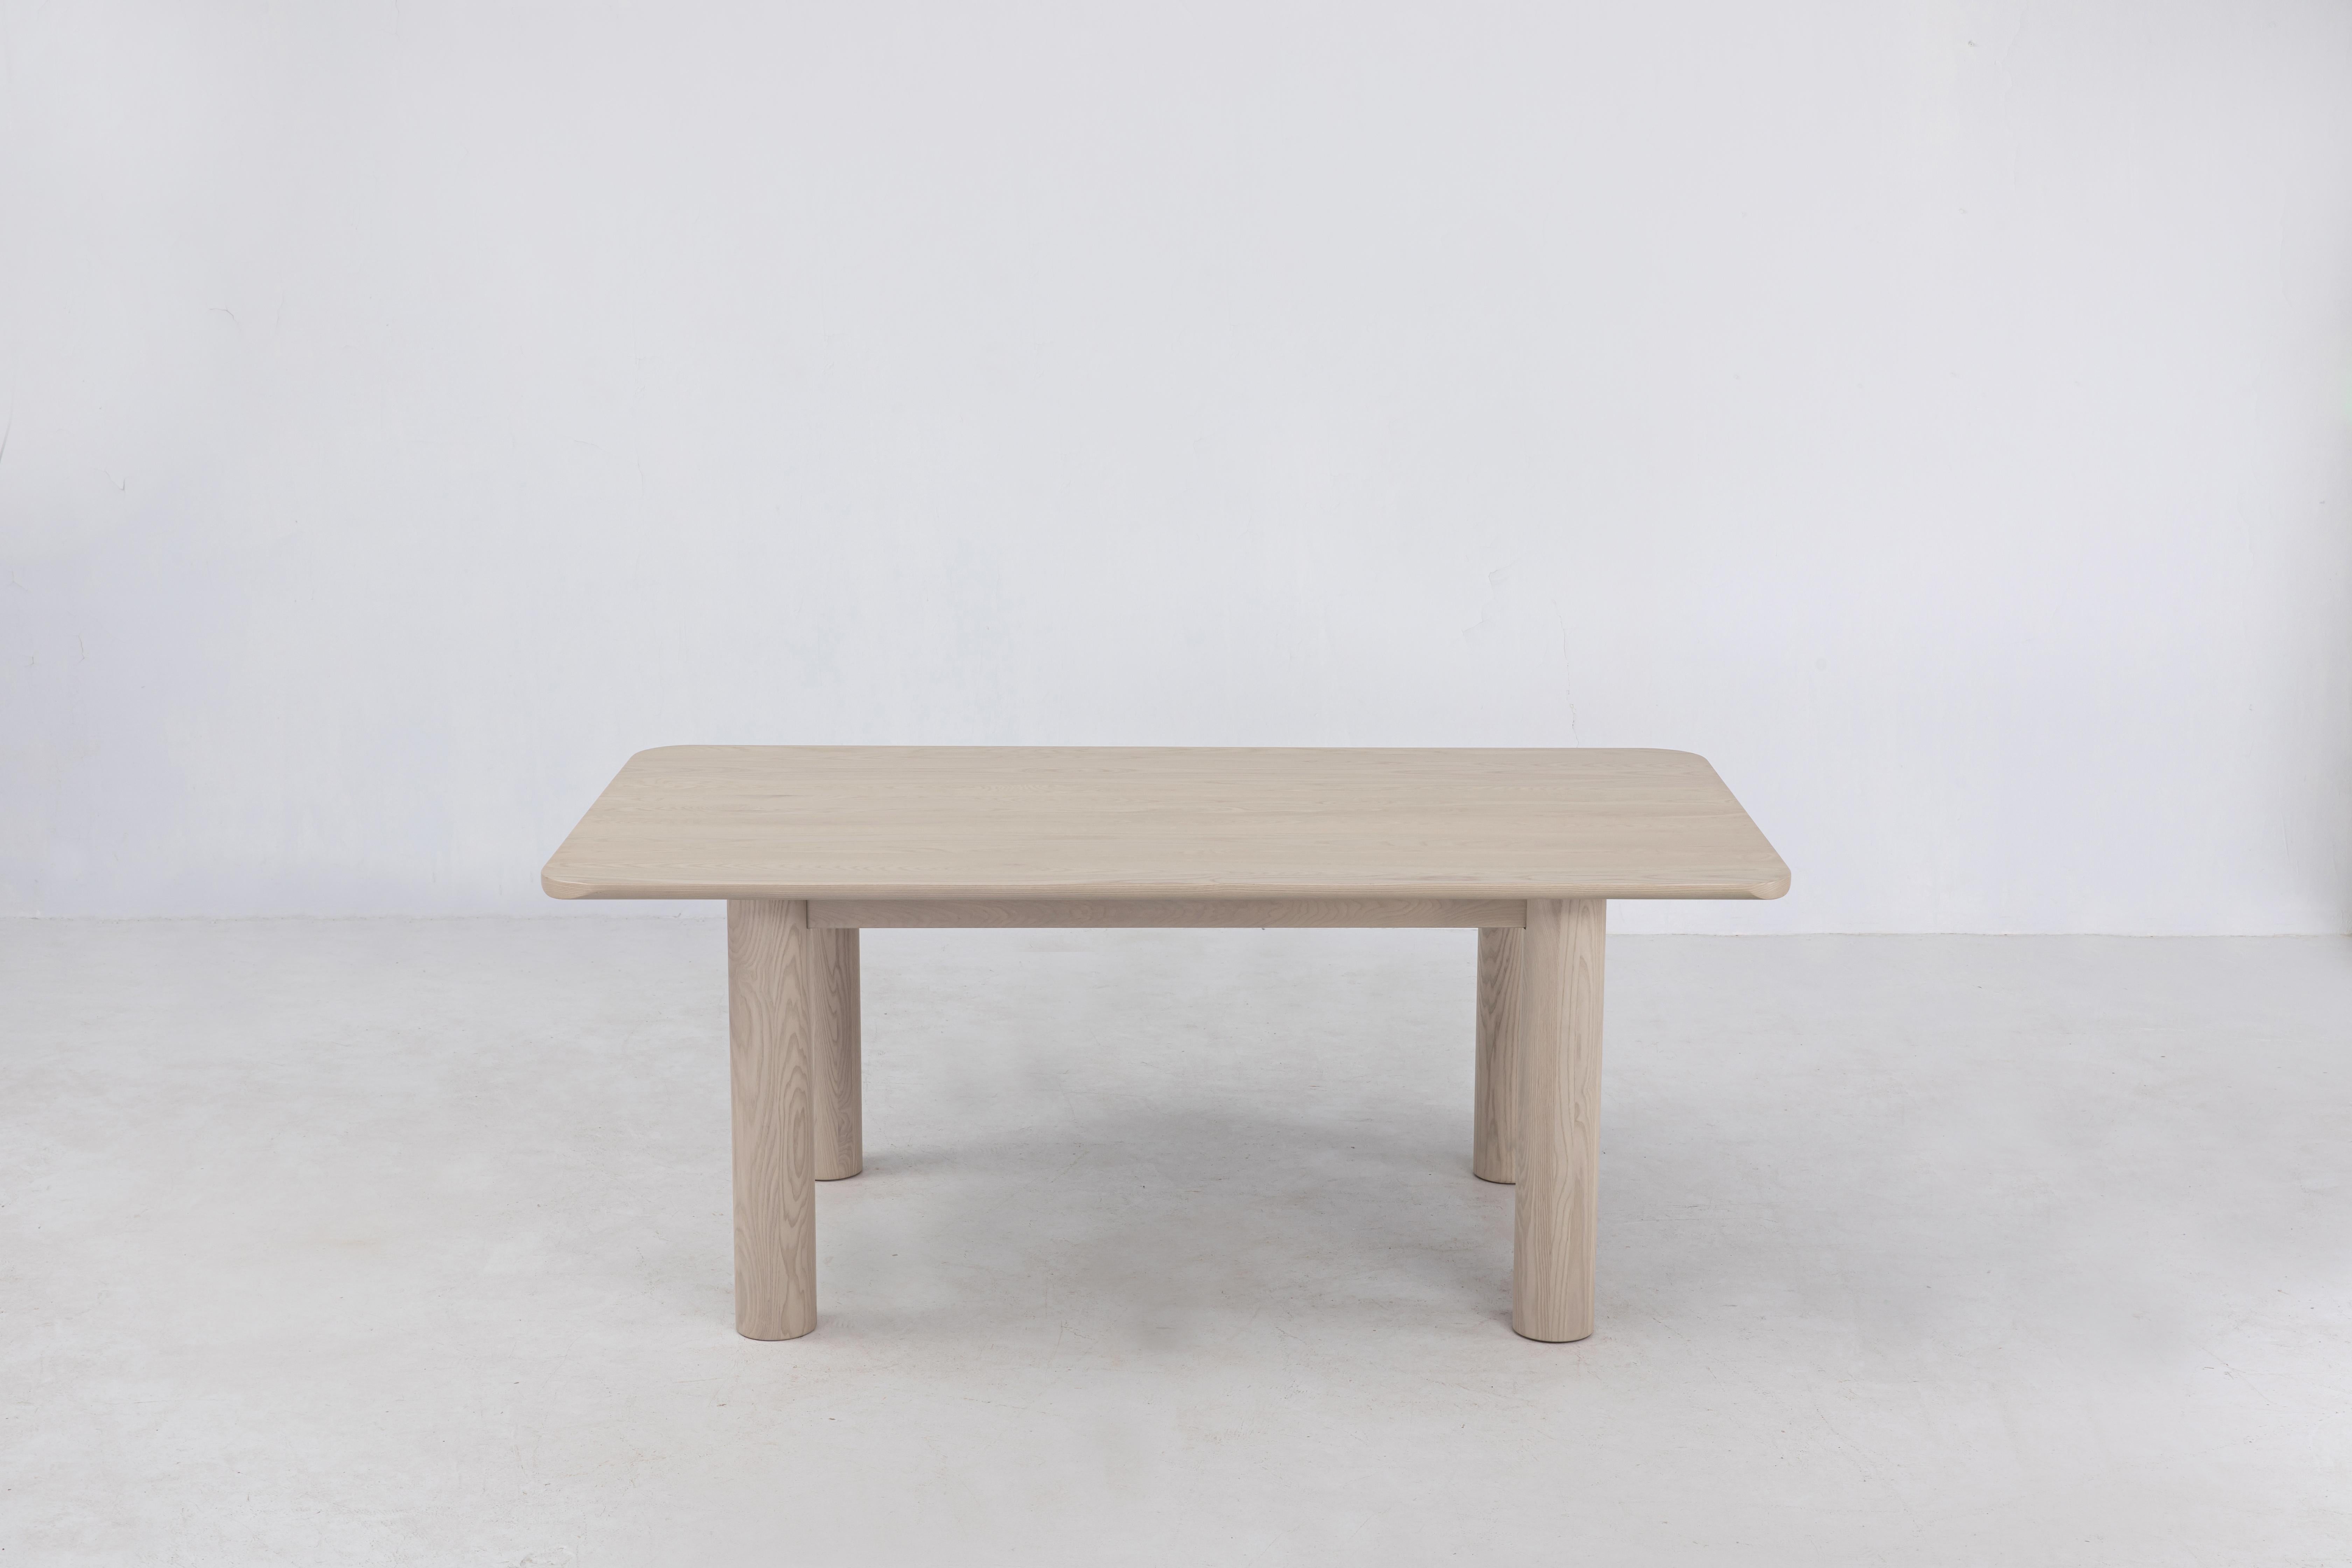 Chinese Arc Dining Table, Nude, 76